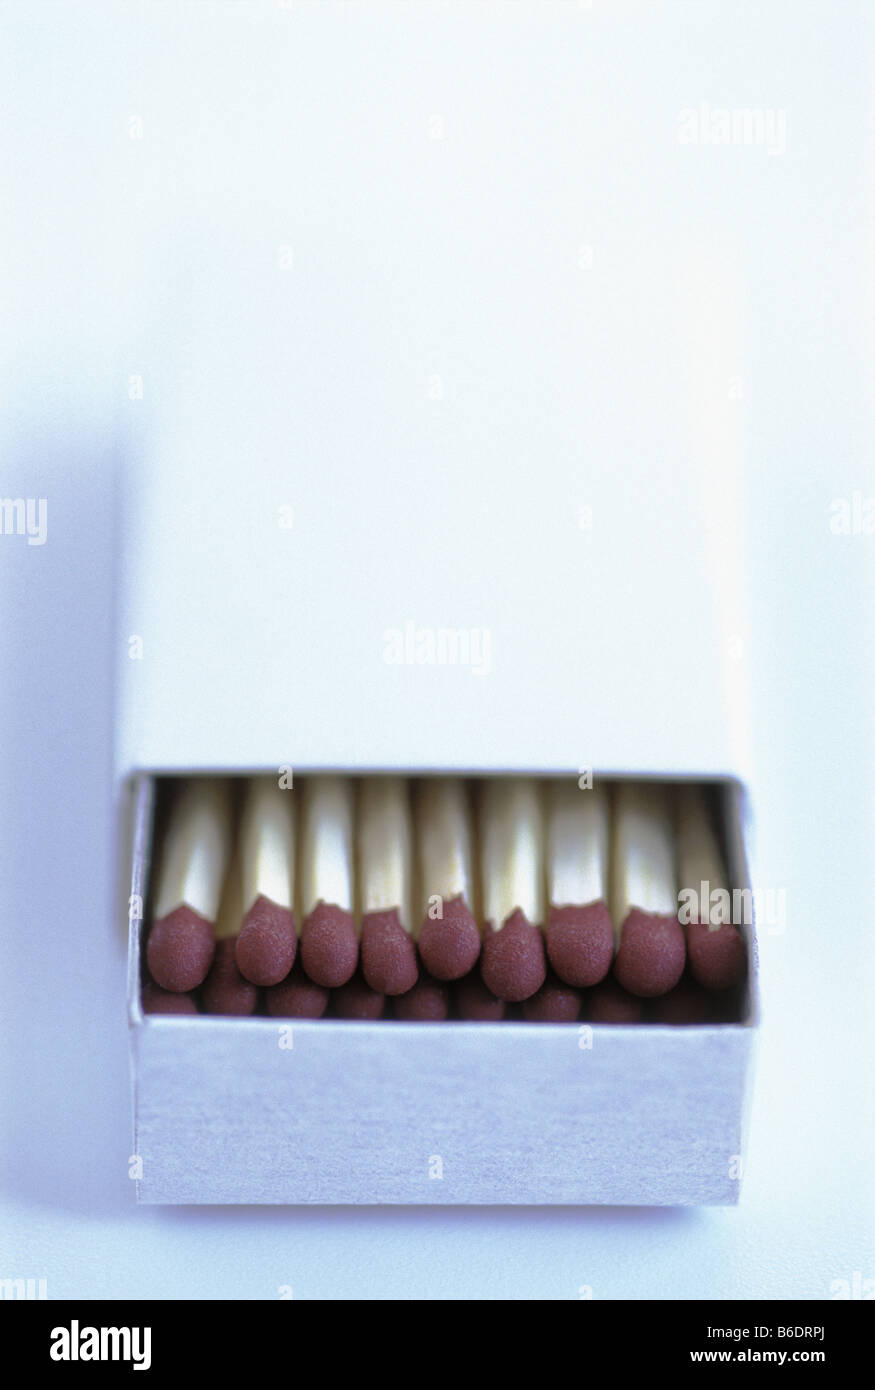 Matches. Open box of matches. Stock Photo